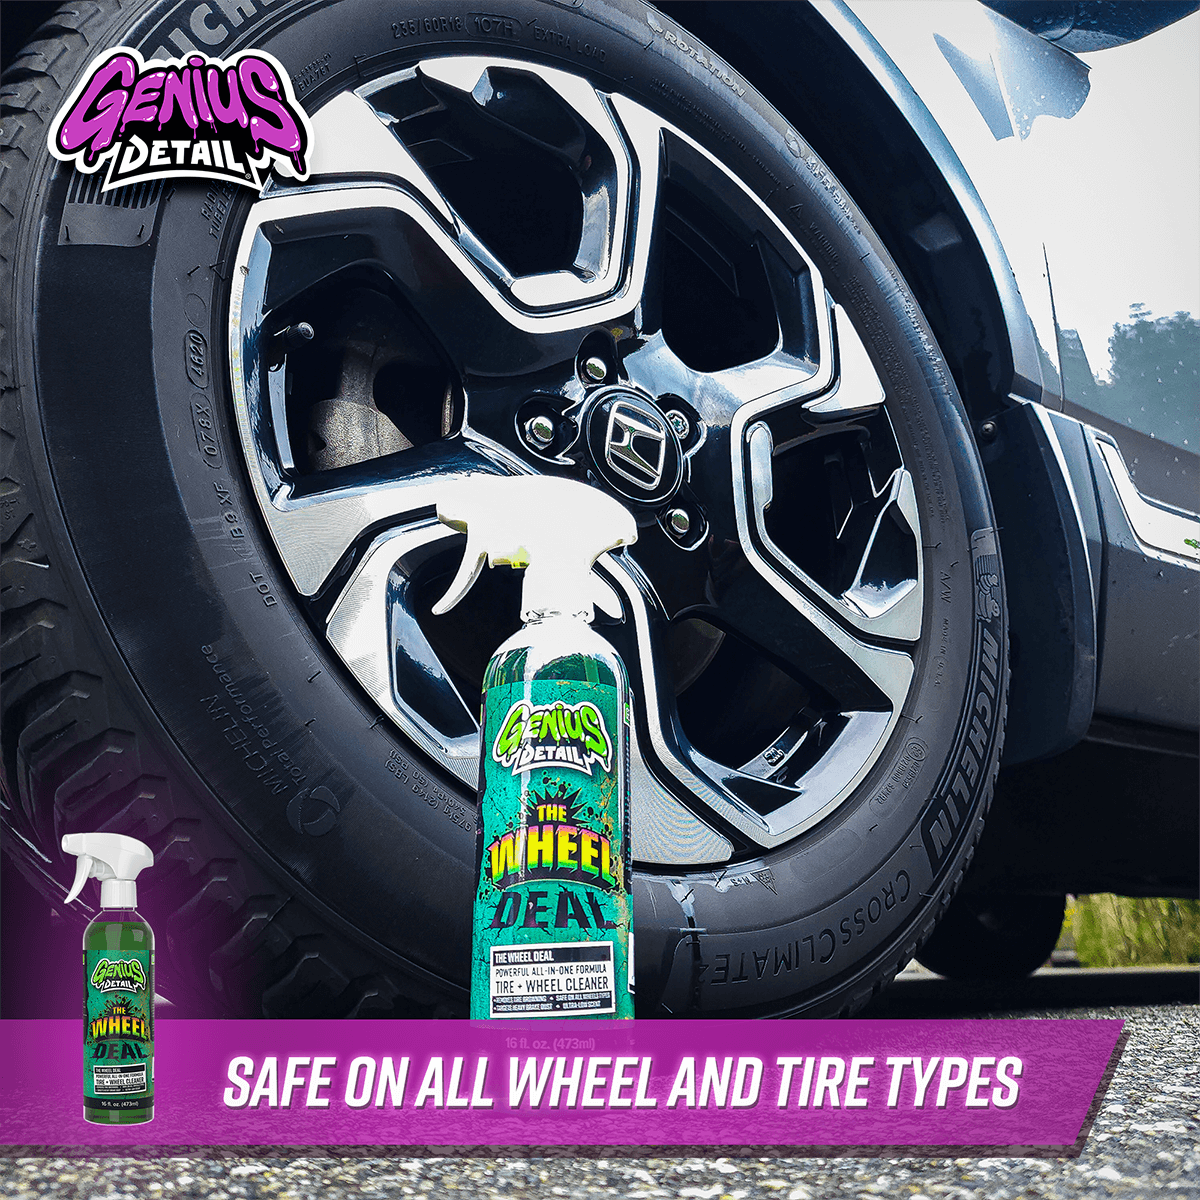 Safe On All Wheel and Tire Types